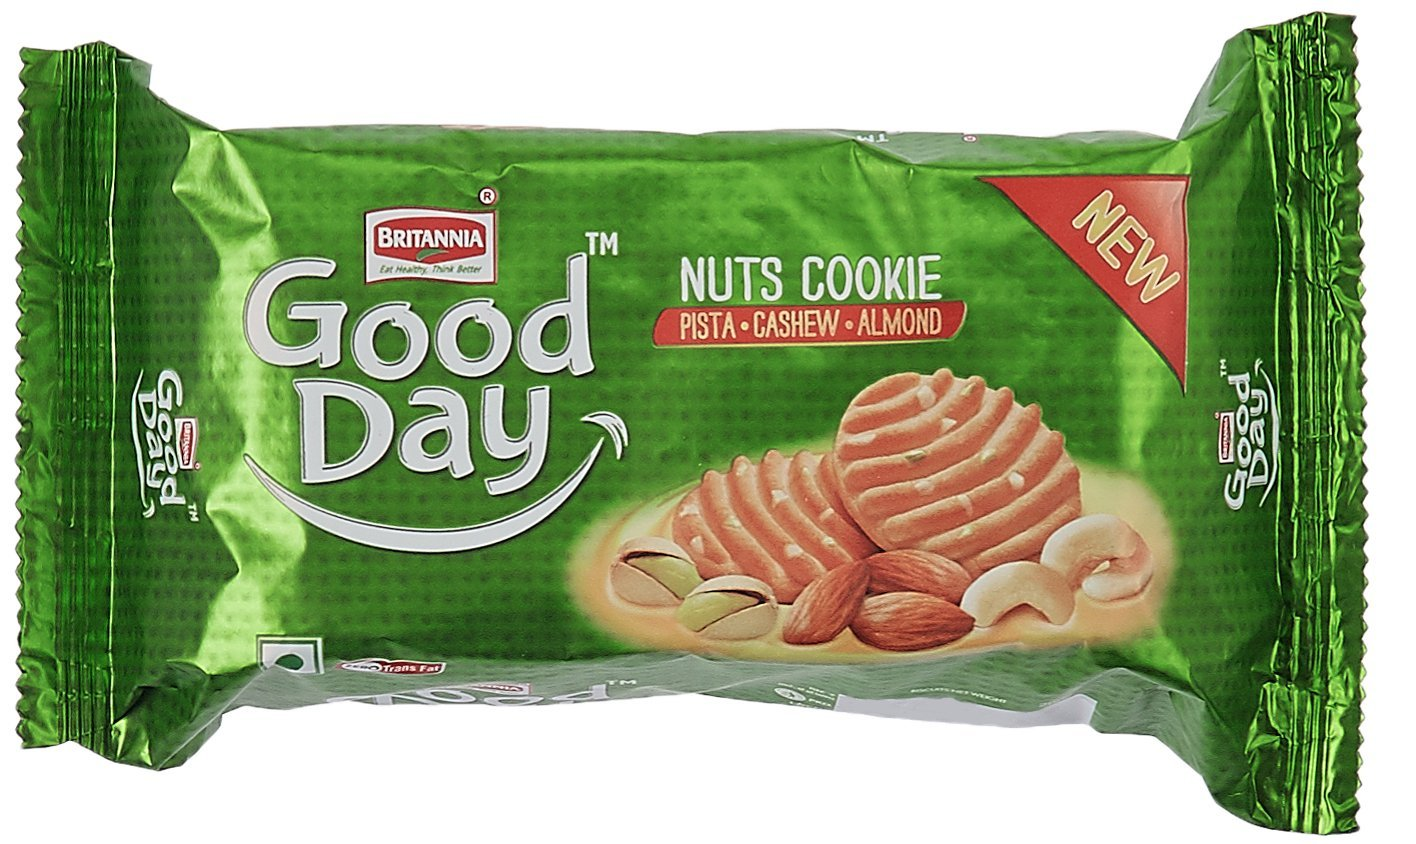 (HURRY) Amazon - Buy Britannia Good Day Biscuit, Nut Cookies, 200g for just Rs.10